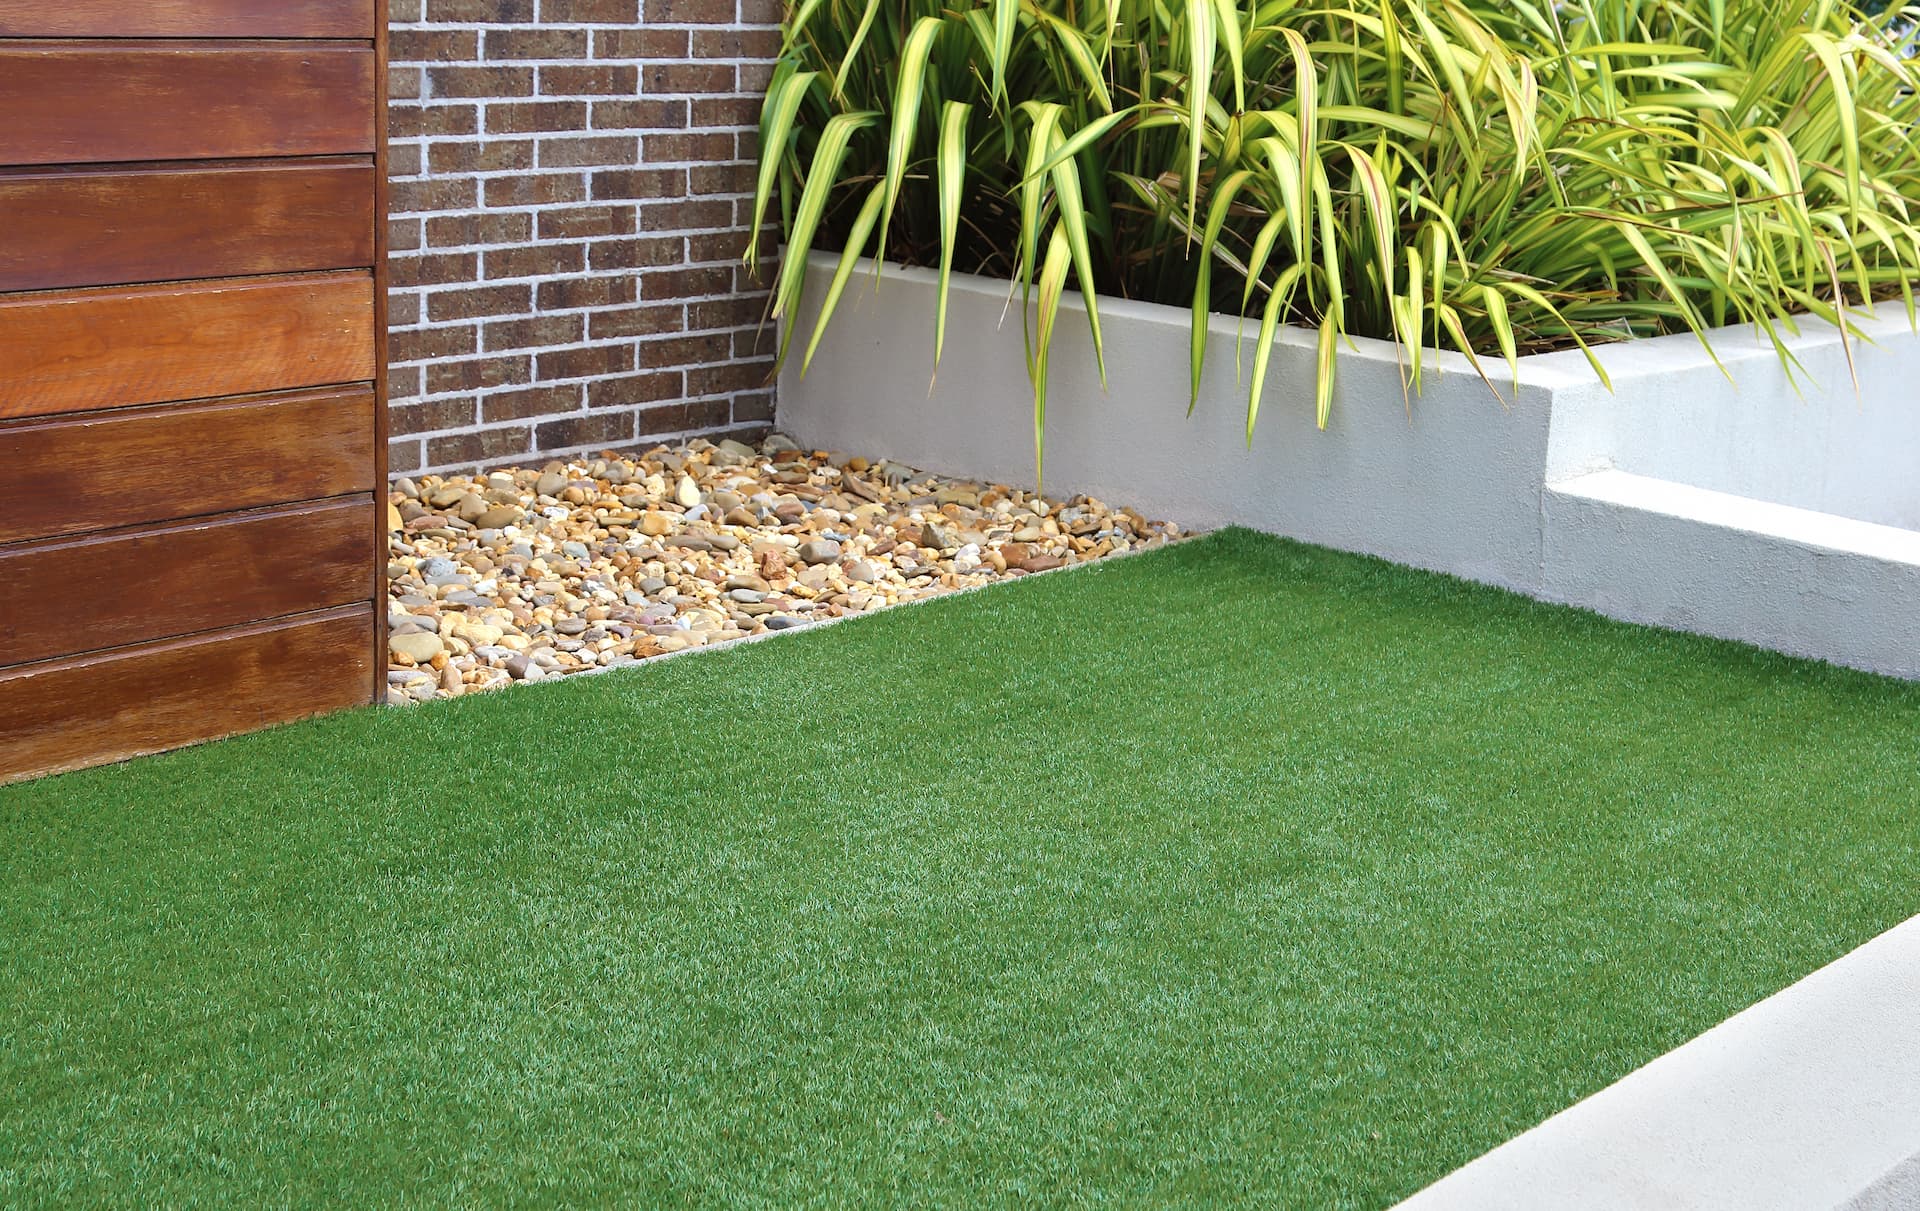 Licenced Artificial Grass & Turf services in Mossley